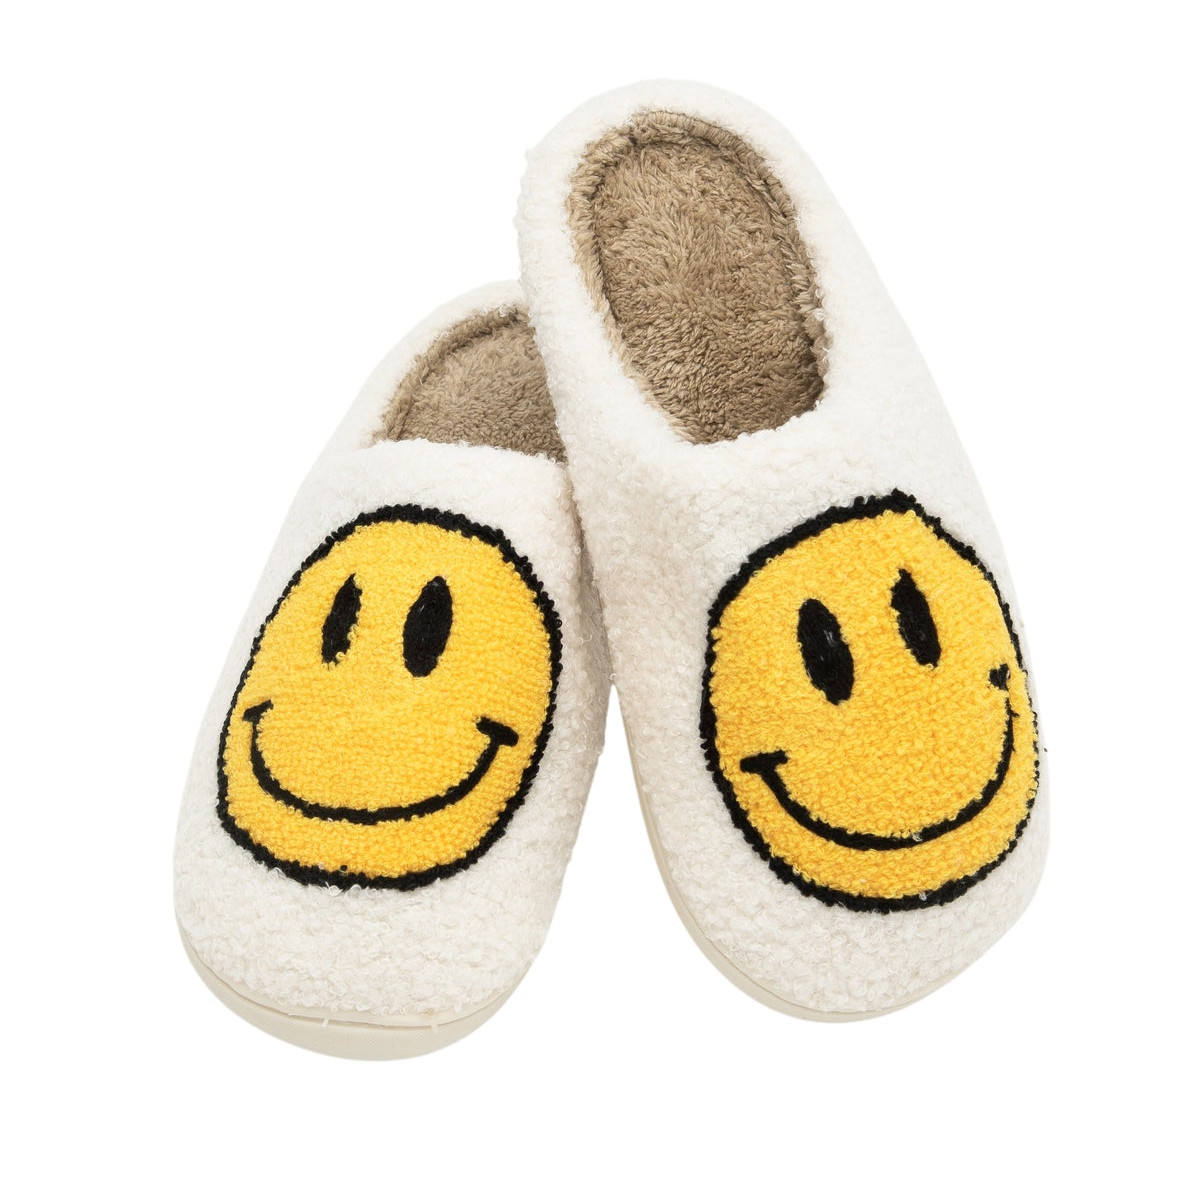 Winter Smiling Face Slippers 